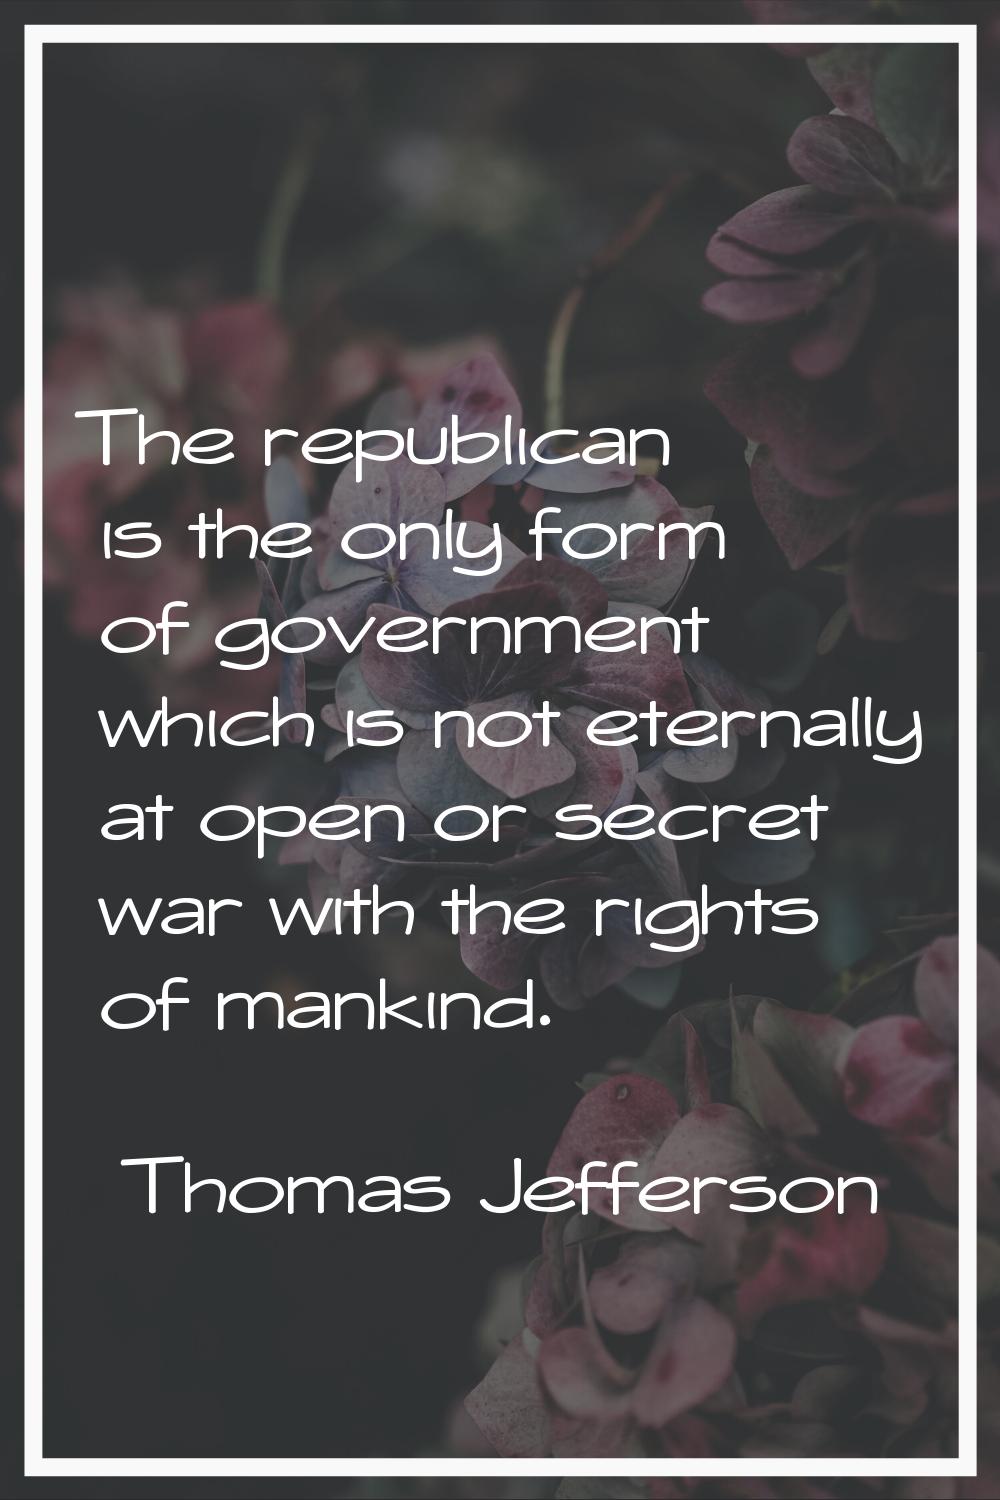 The republican is the only form of government which is not eternally at open or secret war with the